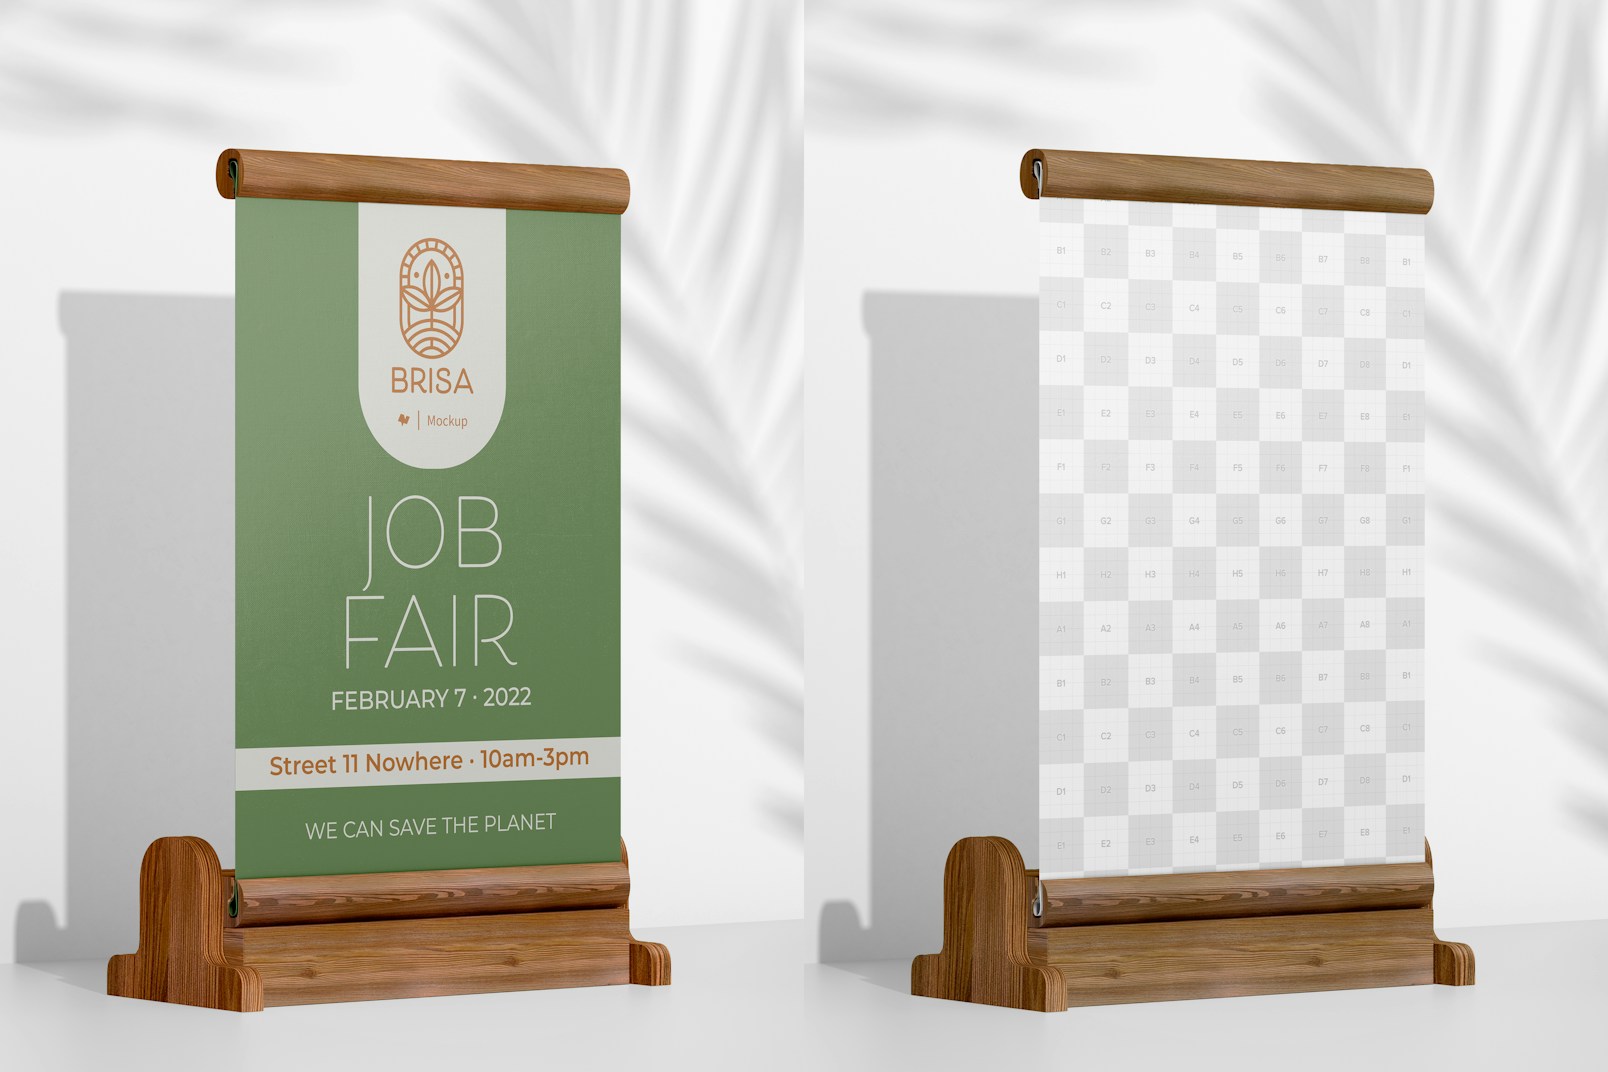 Bamboo Desk Roll Up Stand Mockup